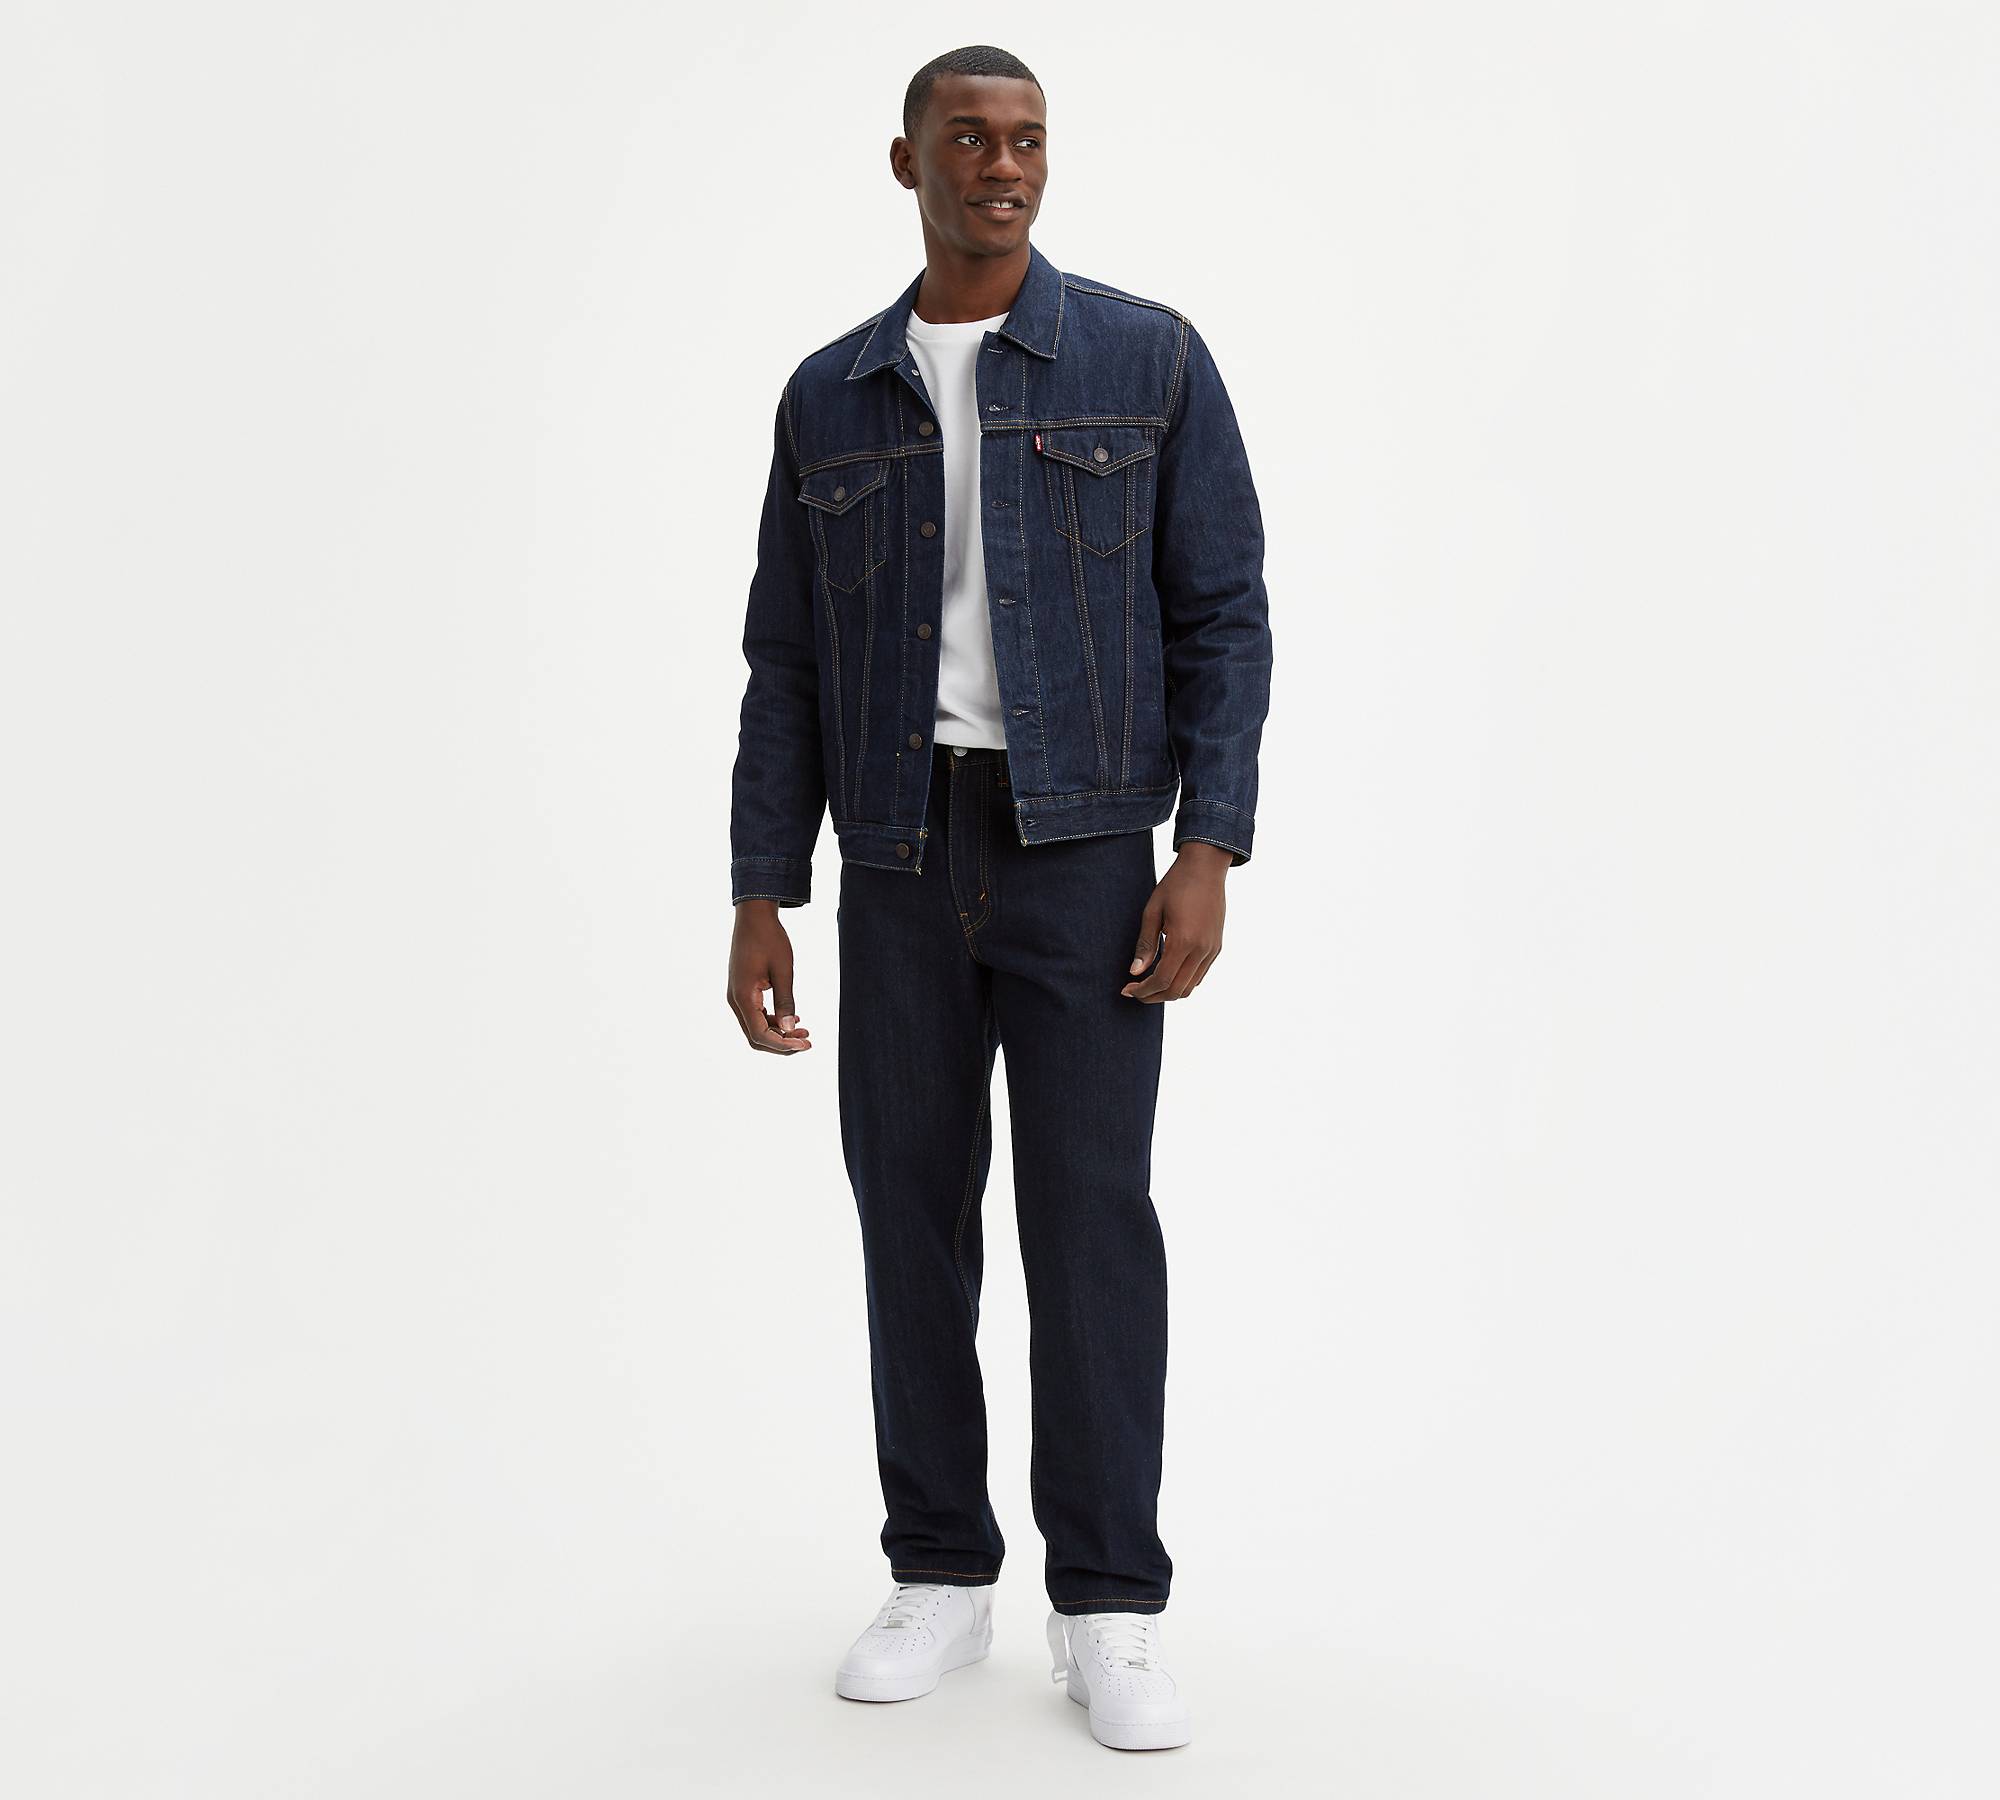 550™ Relaxed Fit Men's Jeans - Dark Wash | Levi's® US